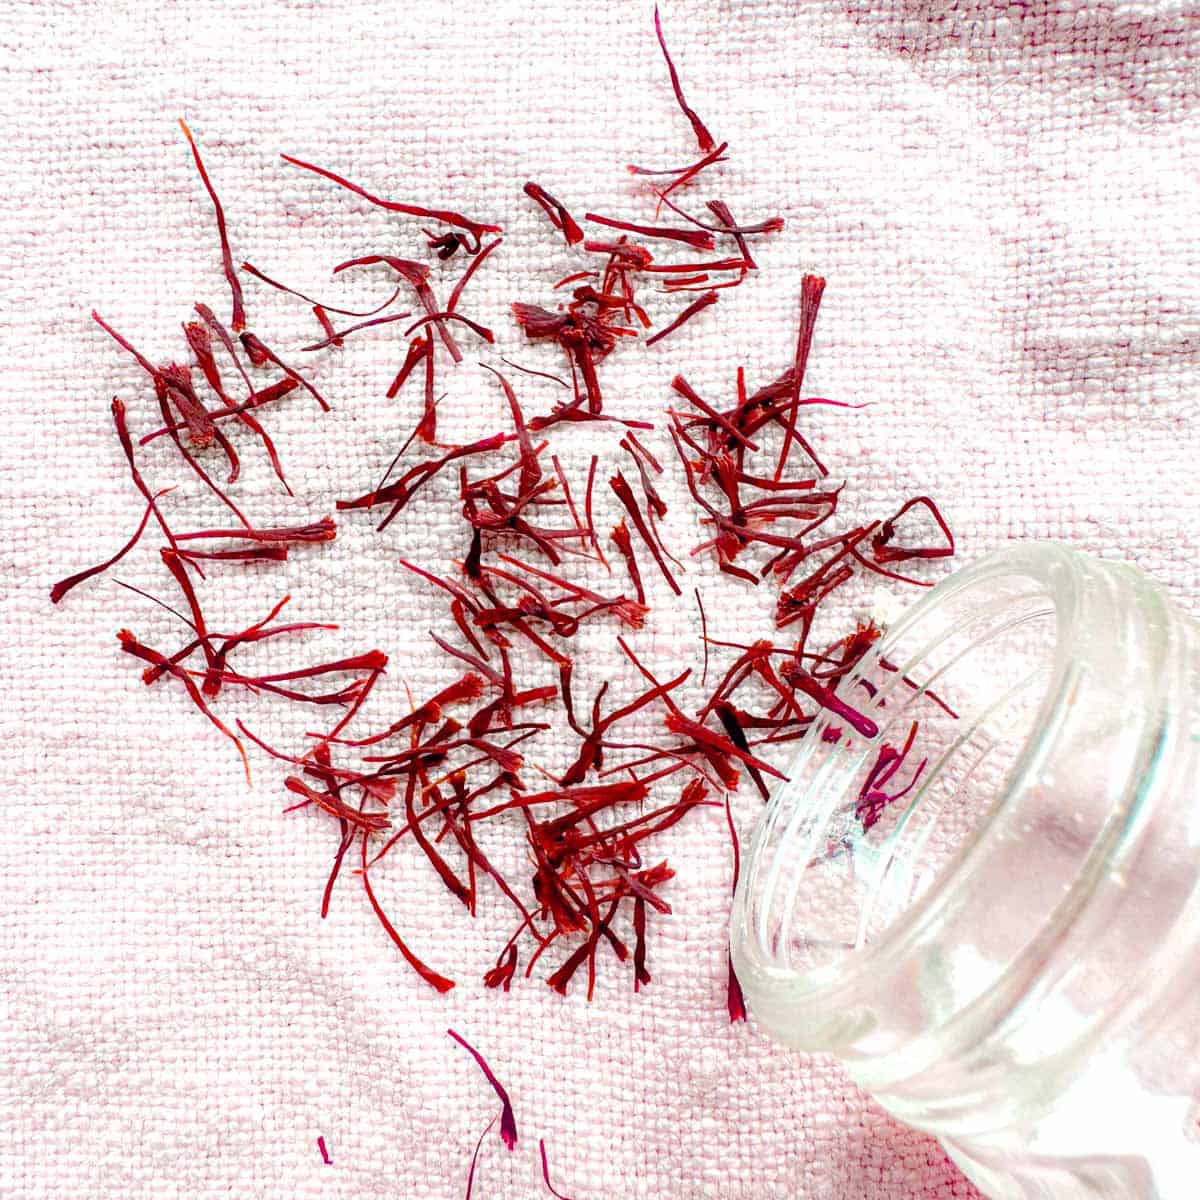 Saffron threads poured out from a glass bottle on a pink towel